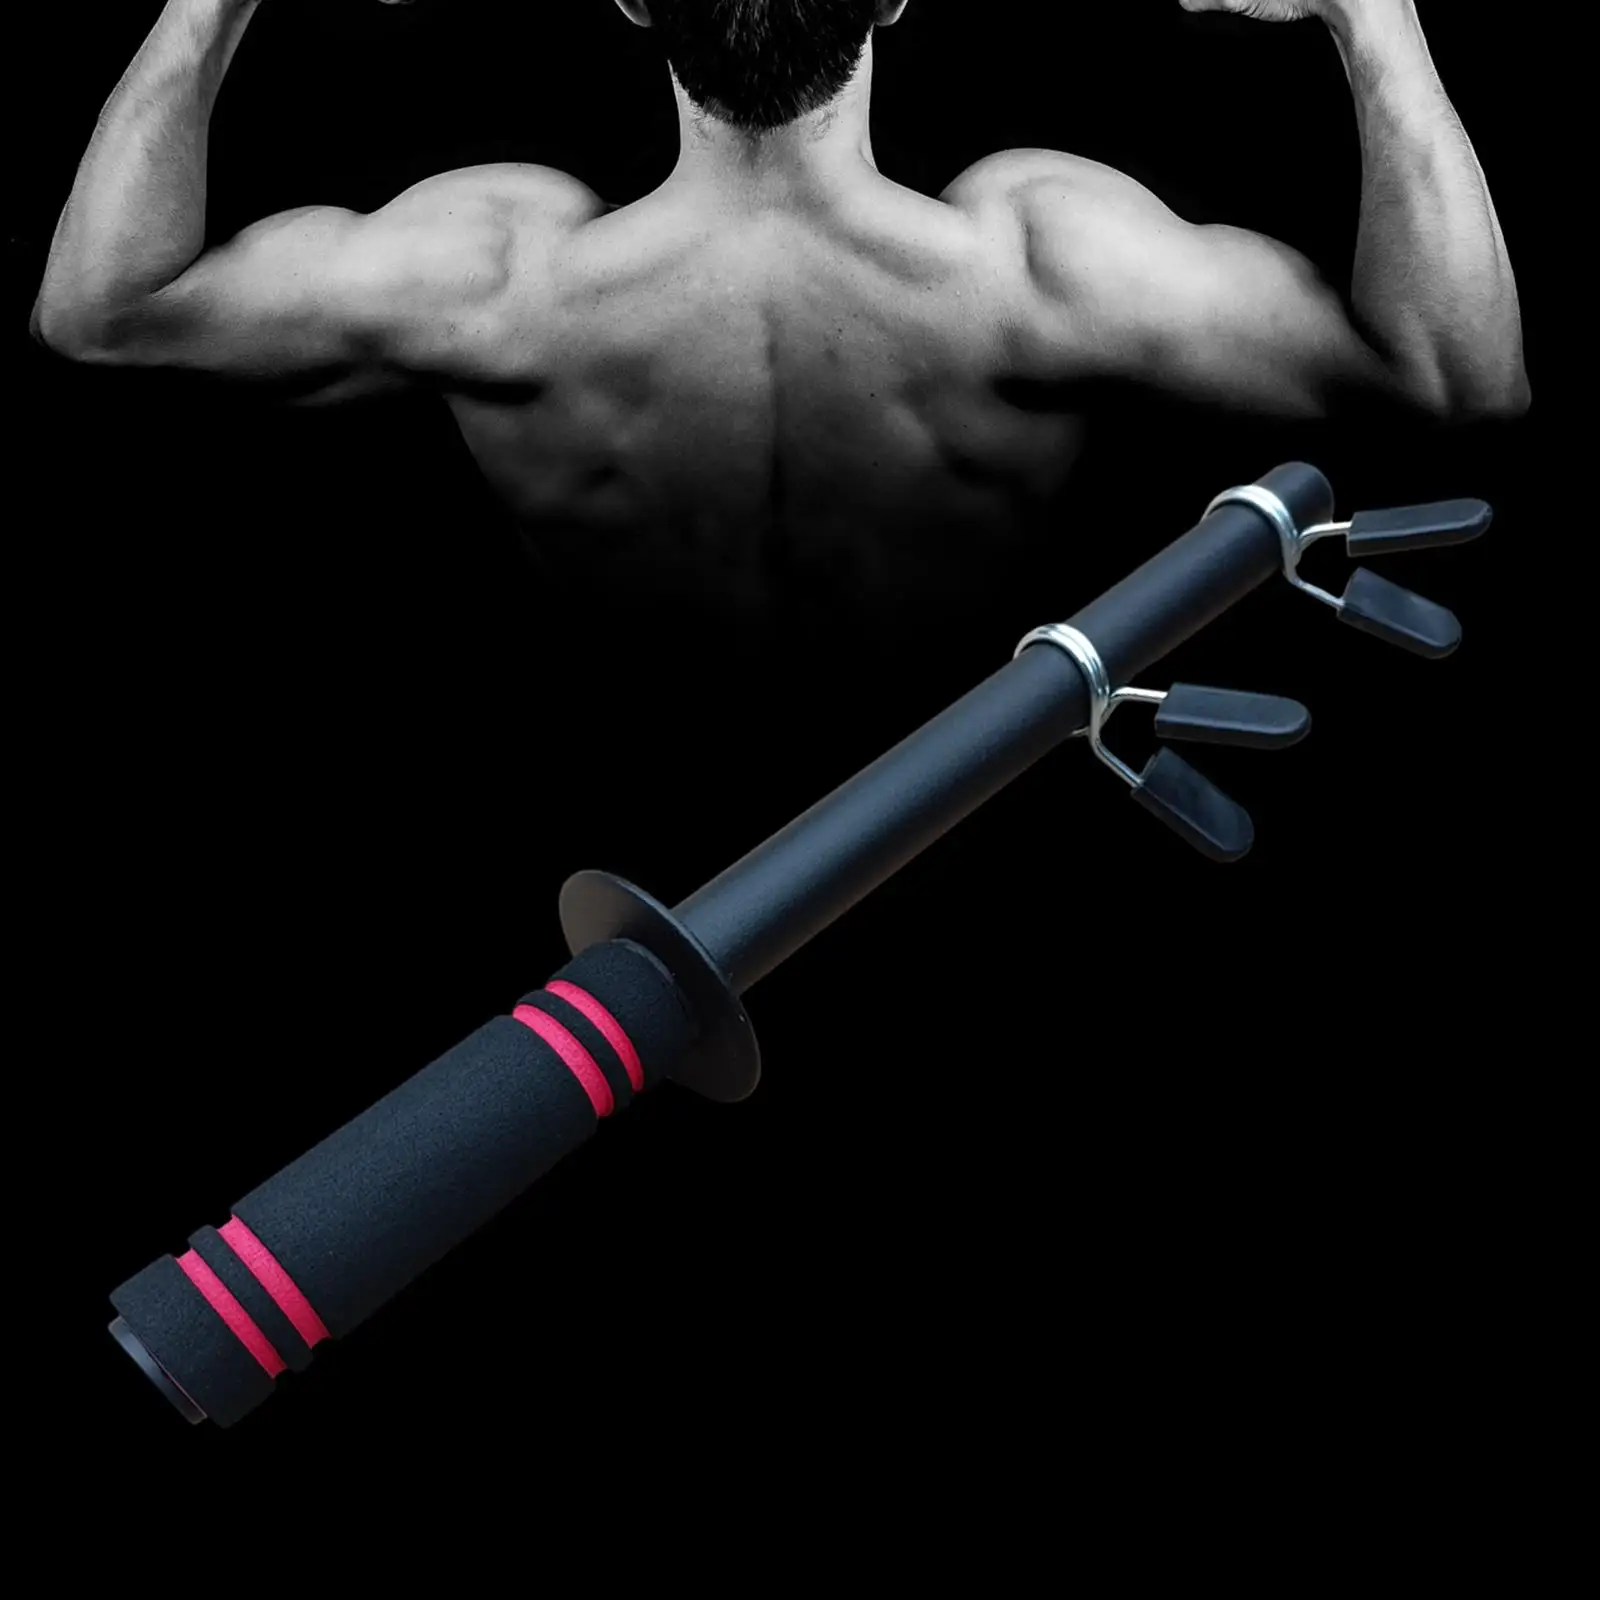 Dumbbell Hand Grip Work Out Supplies Strength Training Forearm Trainer Forearm Wrist Exerciser for Gym Wrist Fitness Equipment